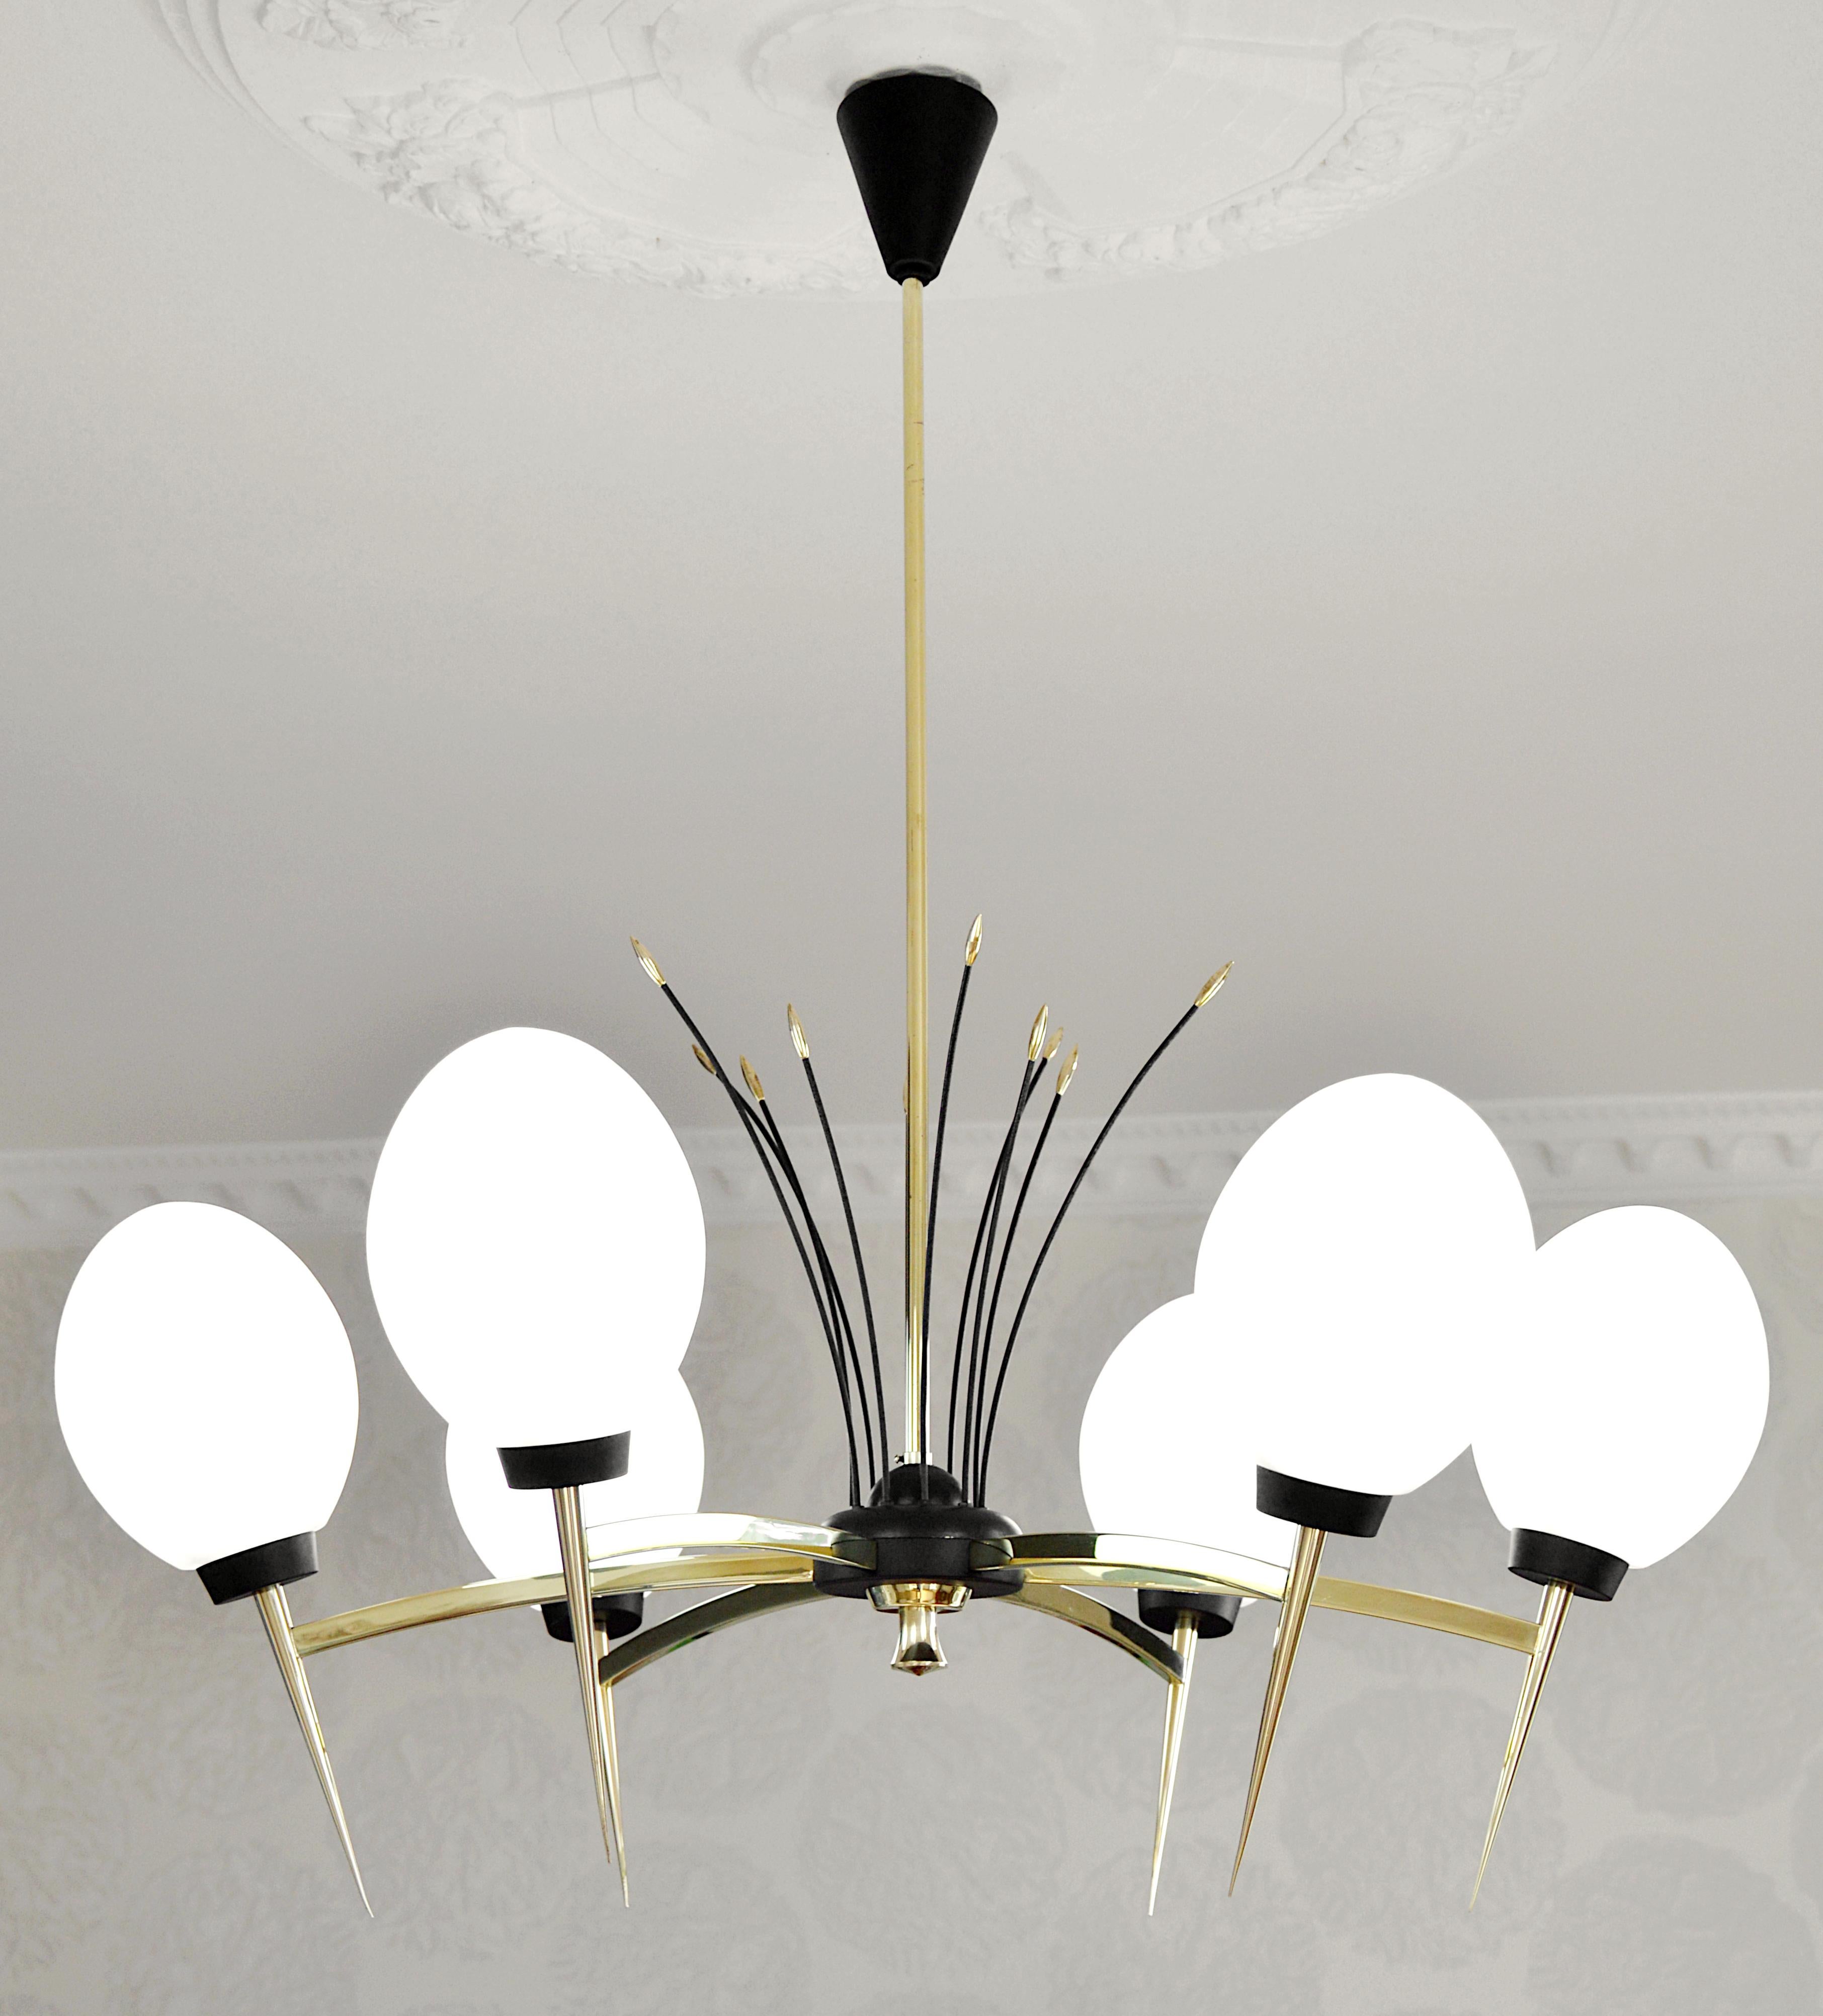 Lunel Gorgeous French Midcentury Chandelier, 1950s In Good Condition For Sale In Saint-Amans-des-Cots, FR